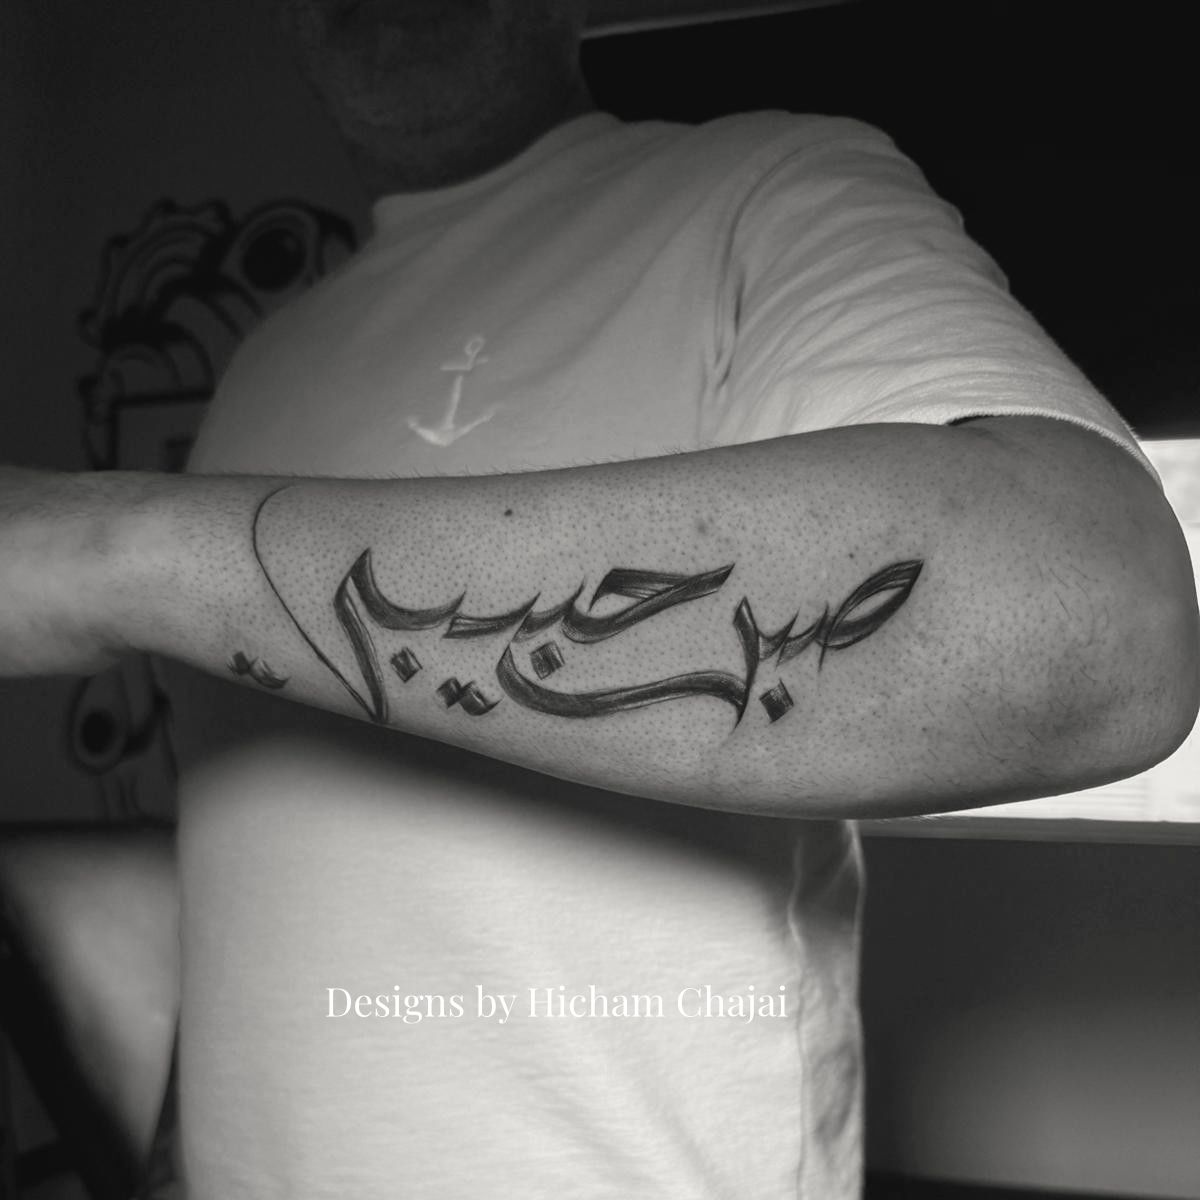 Be #patient my #Love

#ArabicTattoo using the Art of #Calligraphy

A tattoo project in mind with Arabic Letters?
Just pm and we can talk about it

#armtattoo #tattoodesign4u #arabictattoos  #arabiccalligraphy
#tatouage #calligraphie #patience #amour #amor #emotion #promise